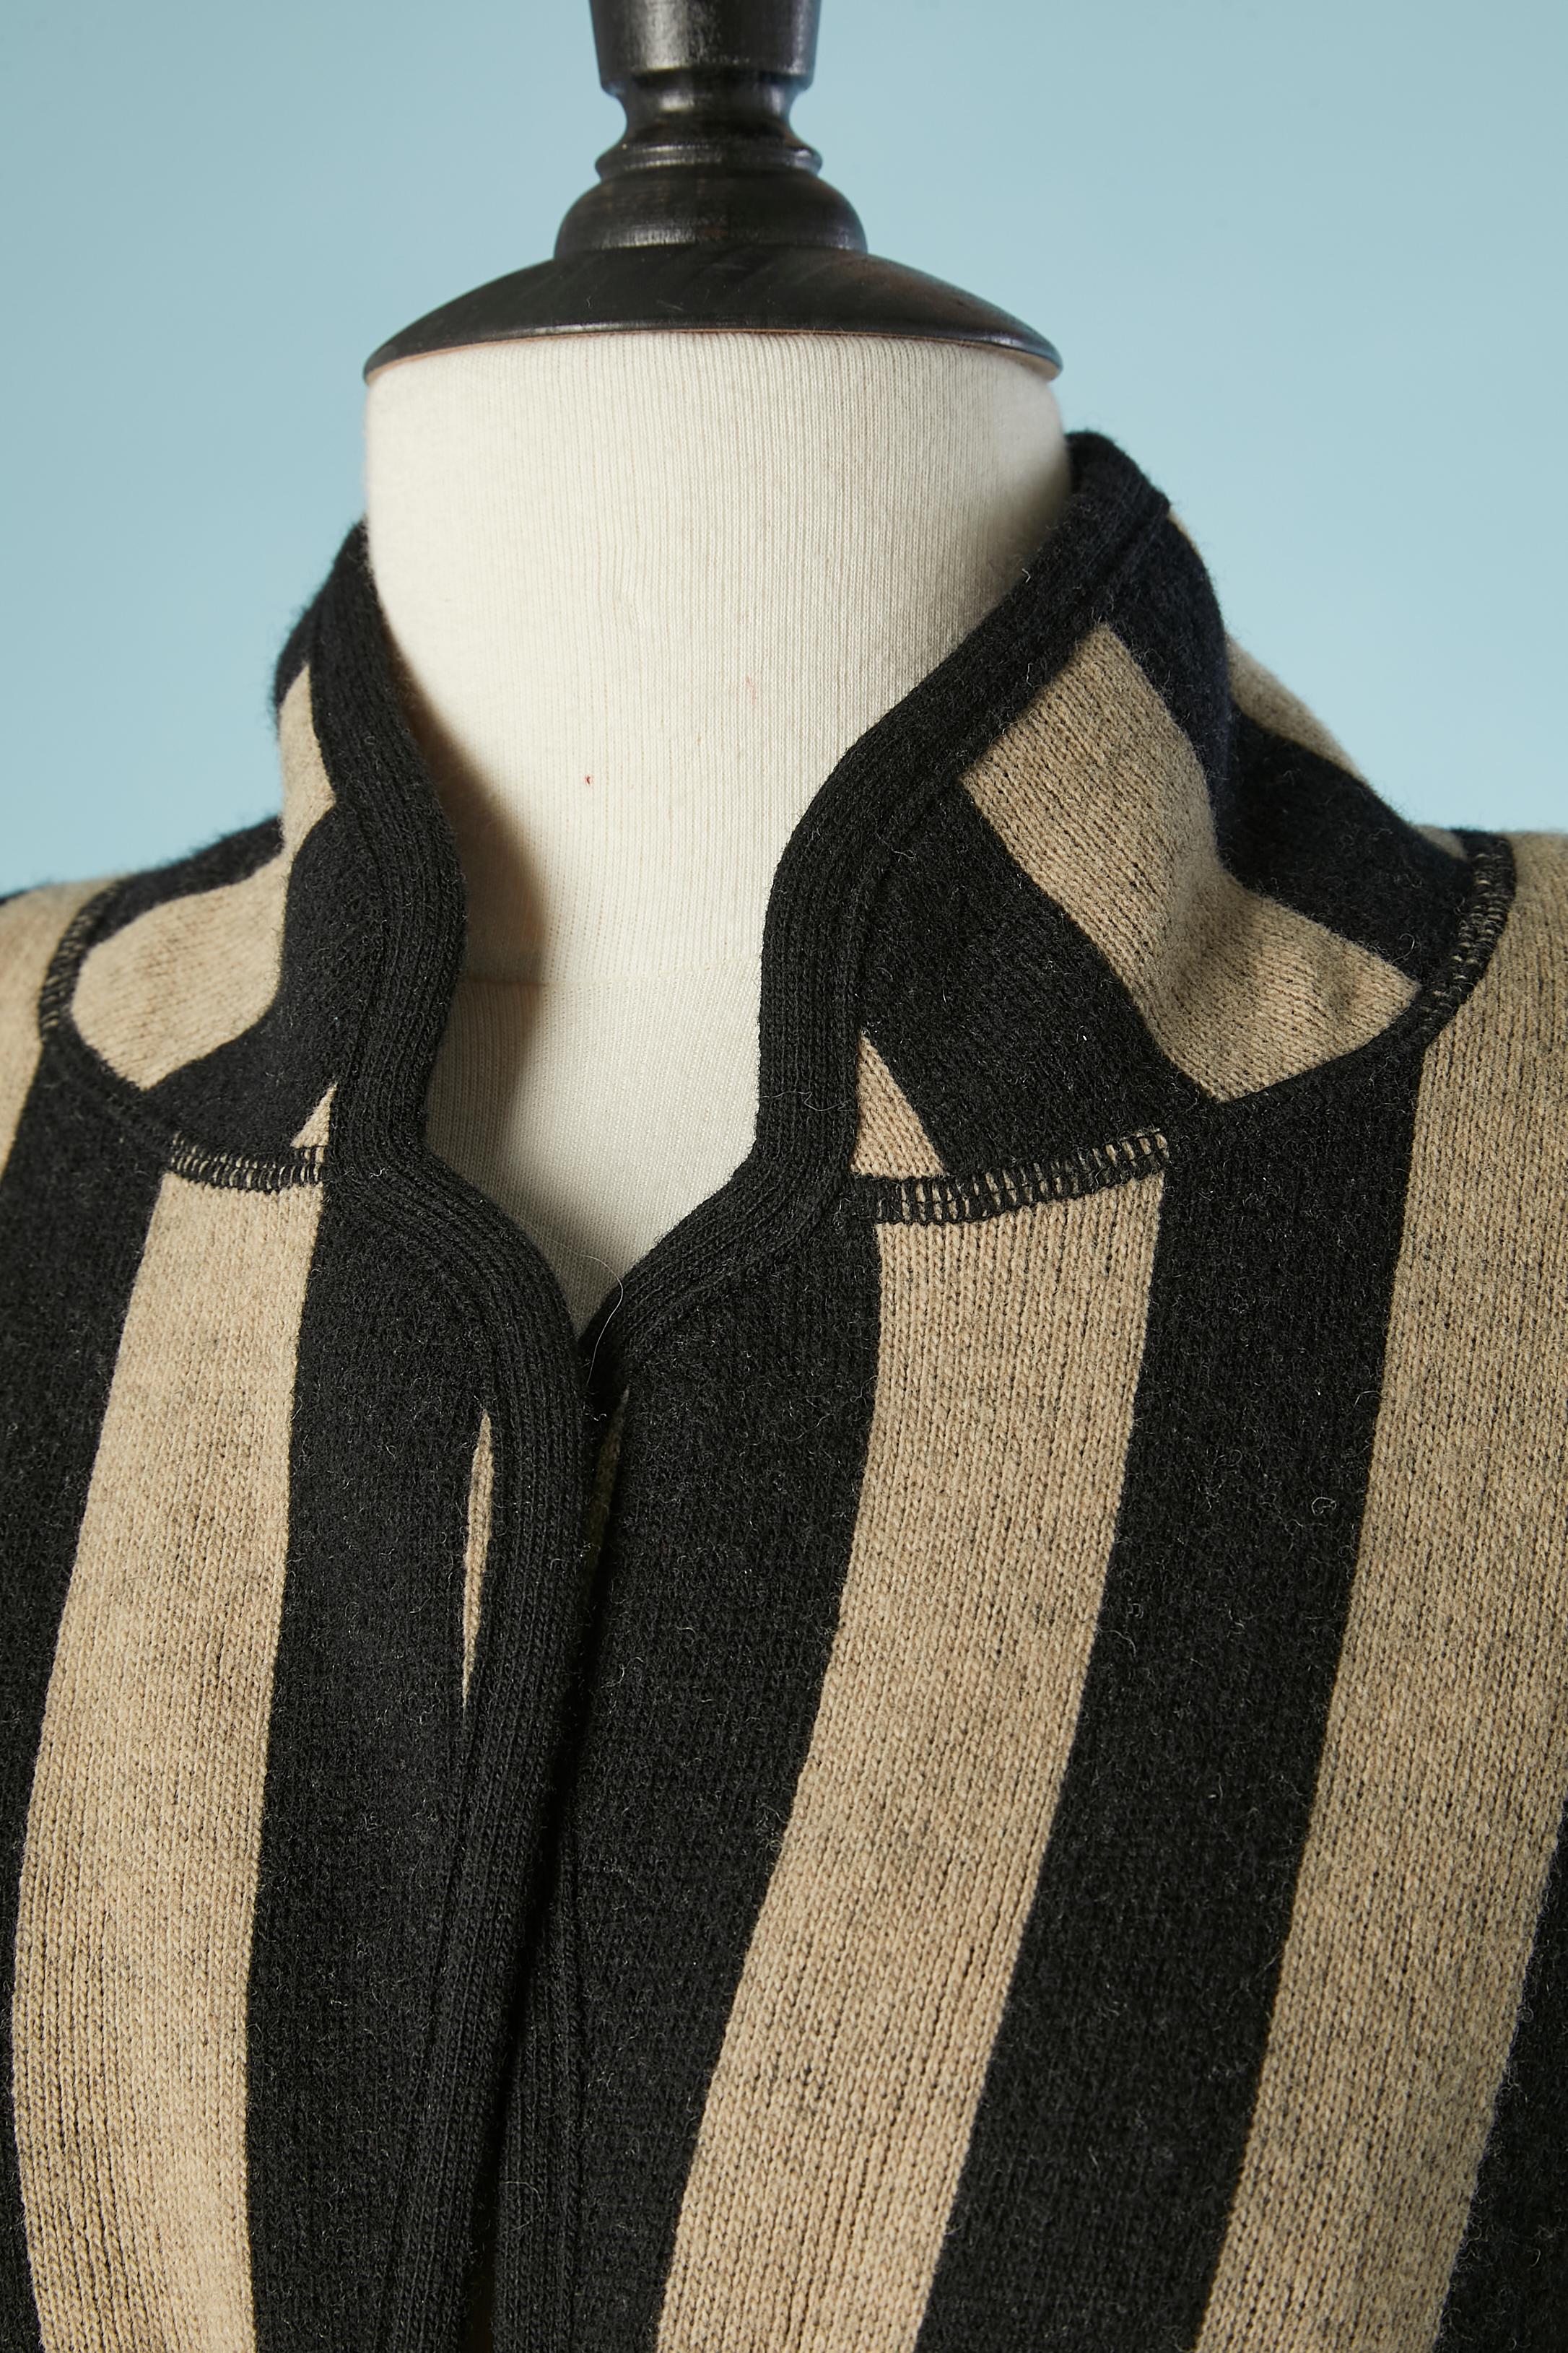 Knit cardigan with grey and black stripes.
Fabric composition: 85% wool, 15% polyamide. Shoulder pad.
SIZE L 